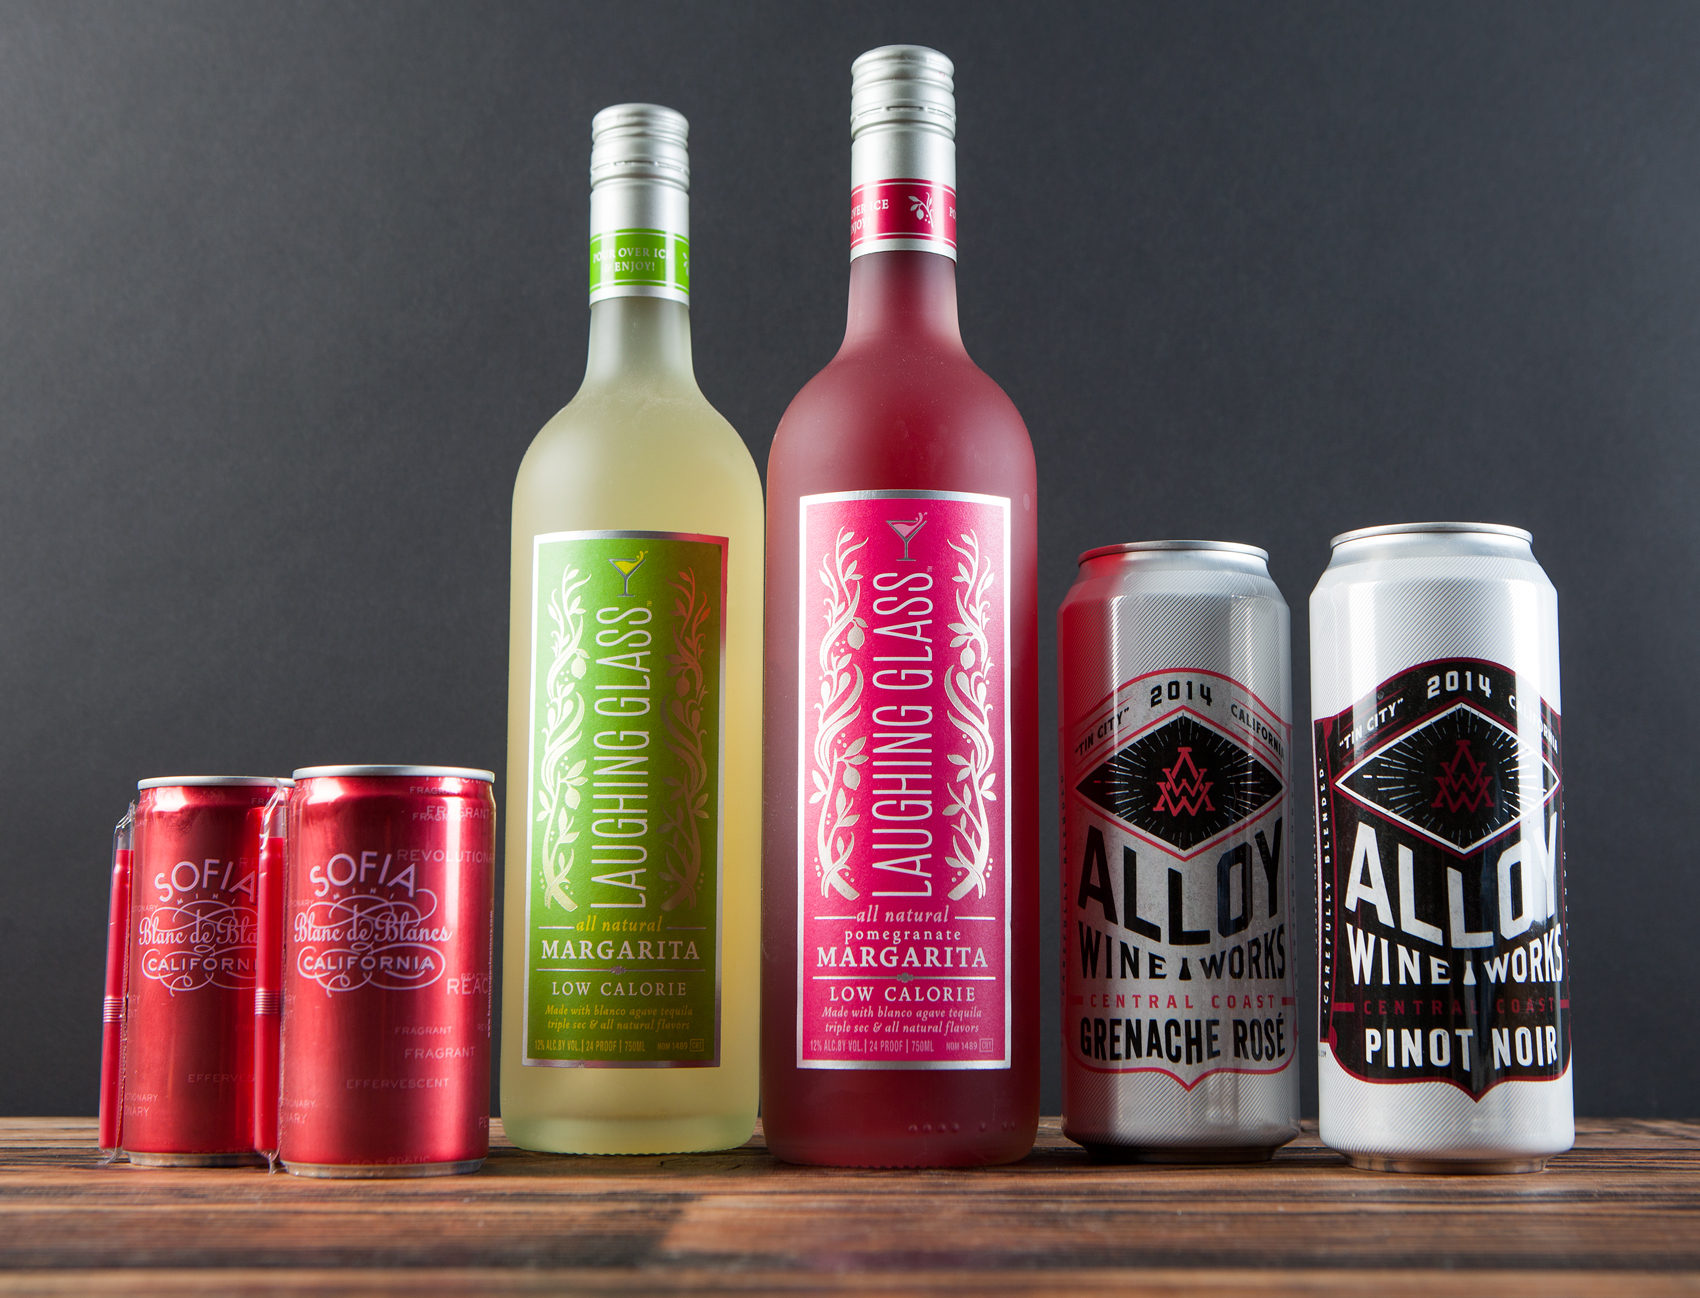 Canned Wines and premixed Margaritas